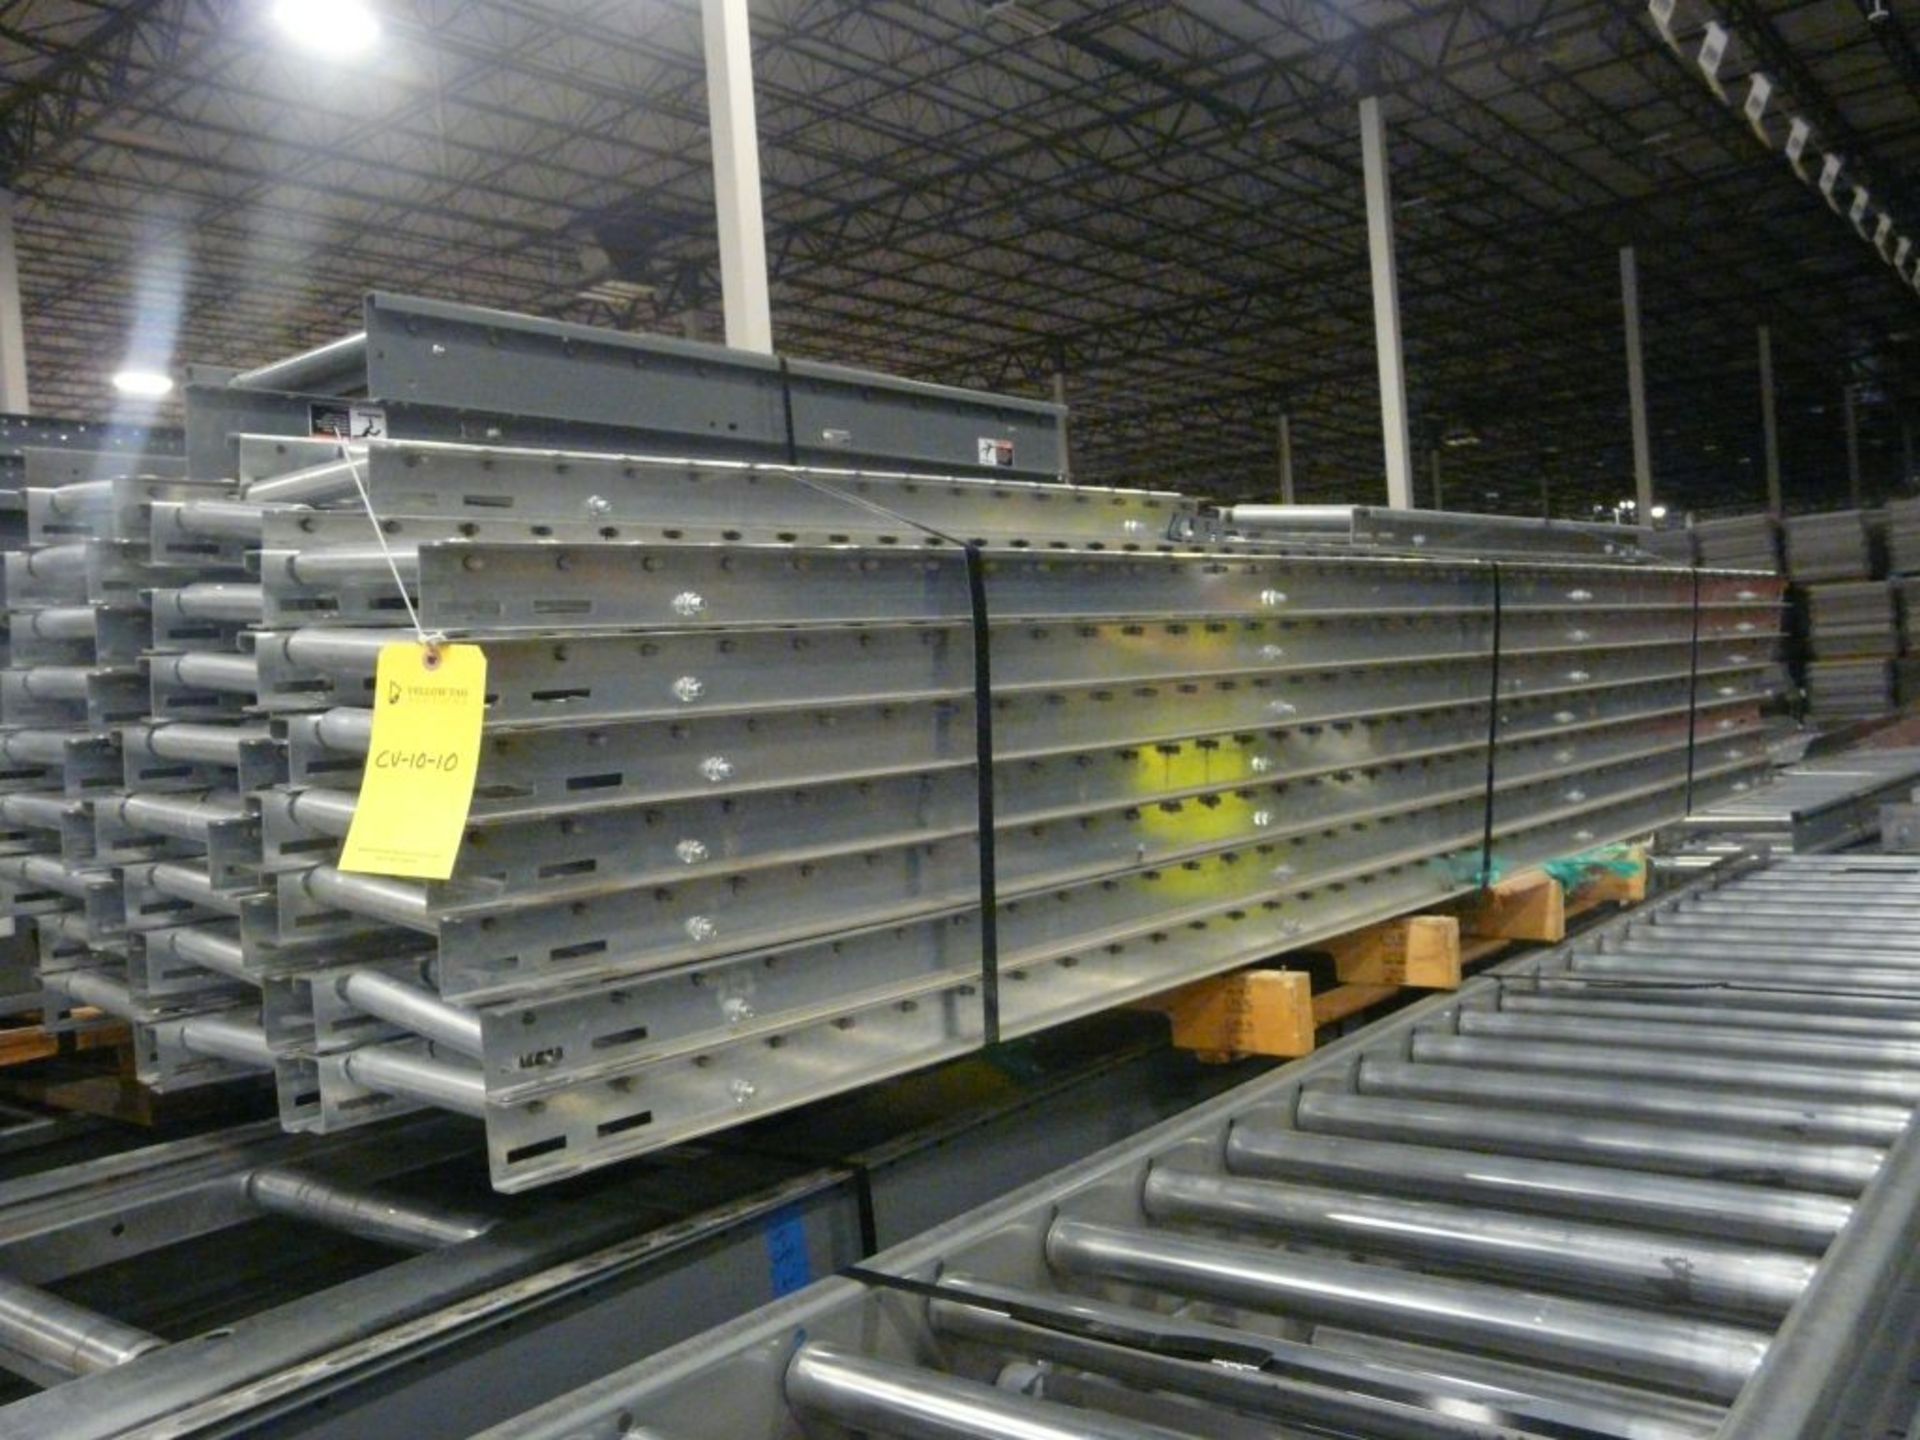 Lot of (24) Conveyors - 10'L x 10"W; Tag: 223547 - $30 Lot Loading Fee